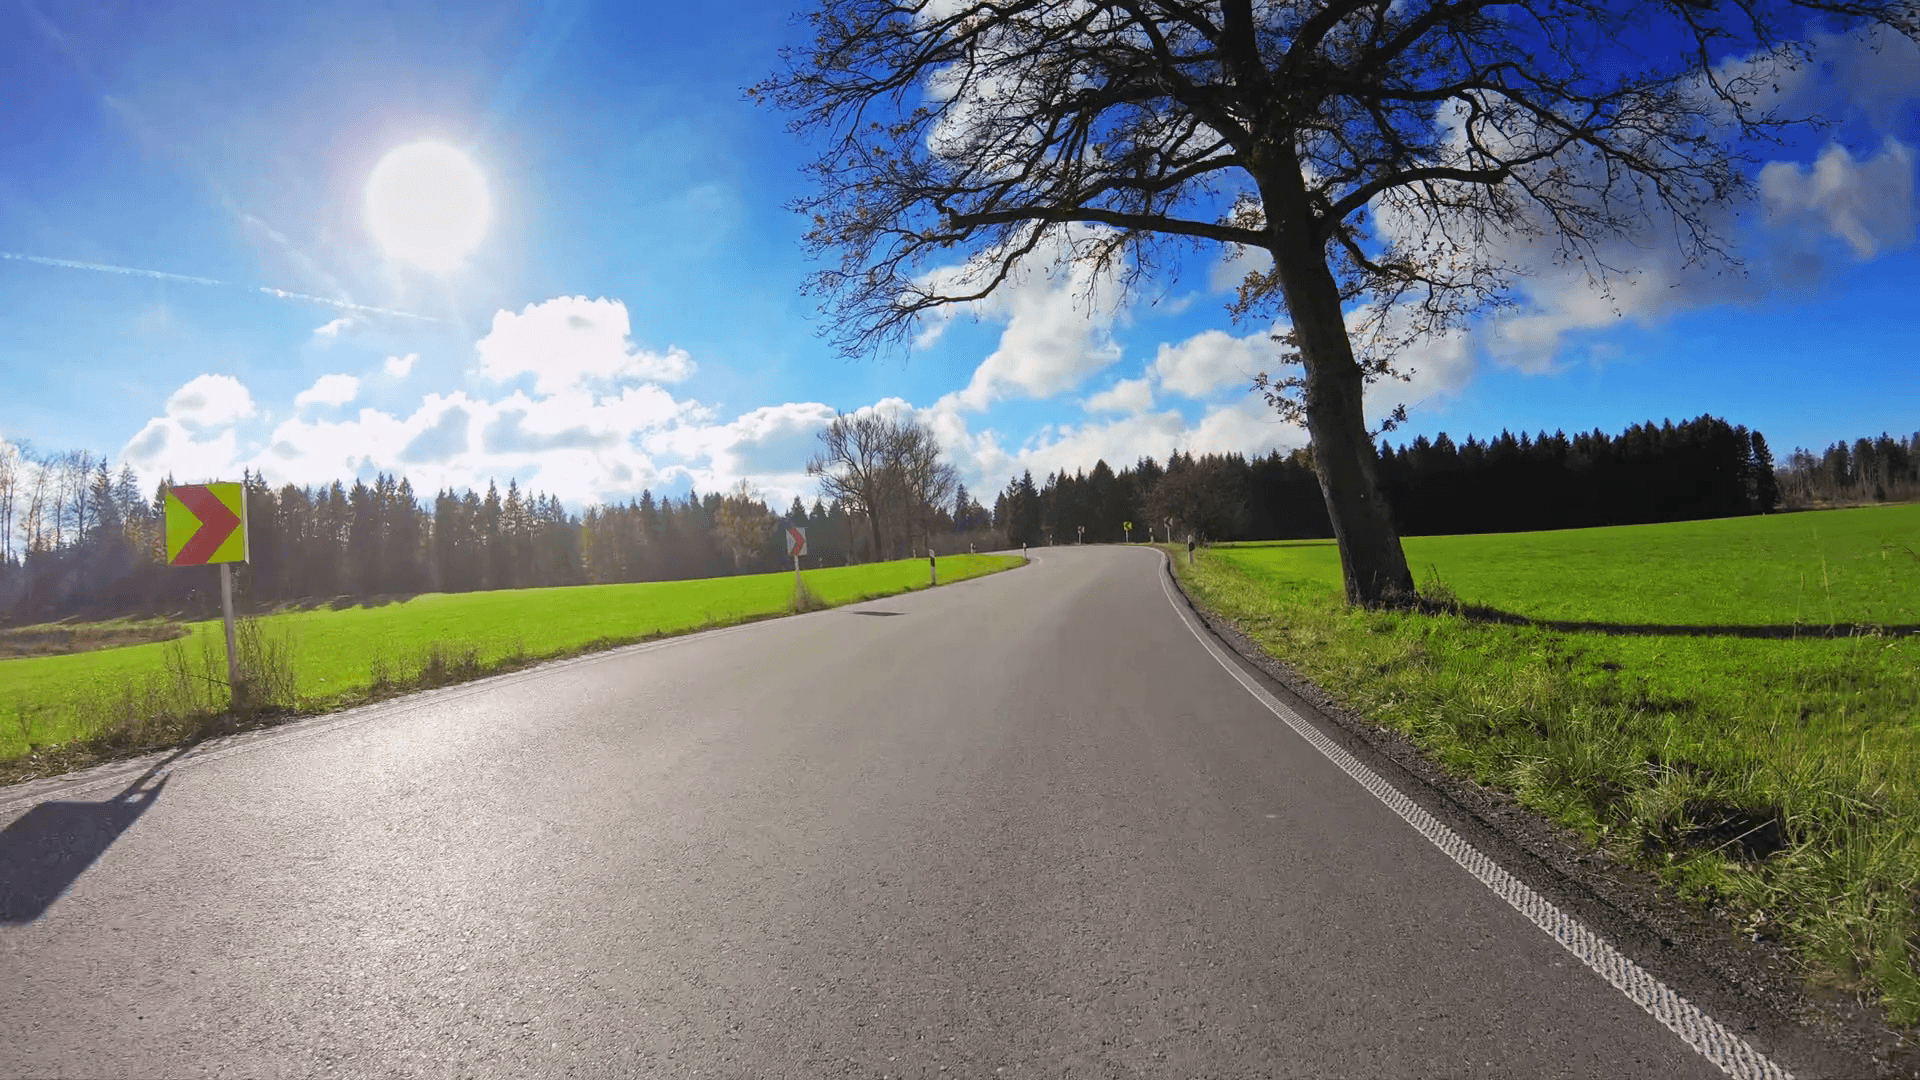 POV vehicle drive across beautiful countryside, local narrow road, green grassland, trees, shining sun blue sky, car travel gopro point of view Stock